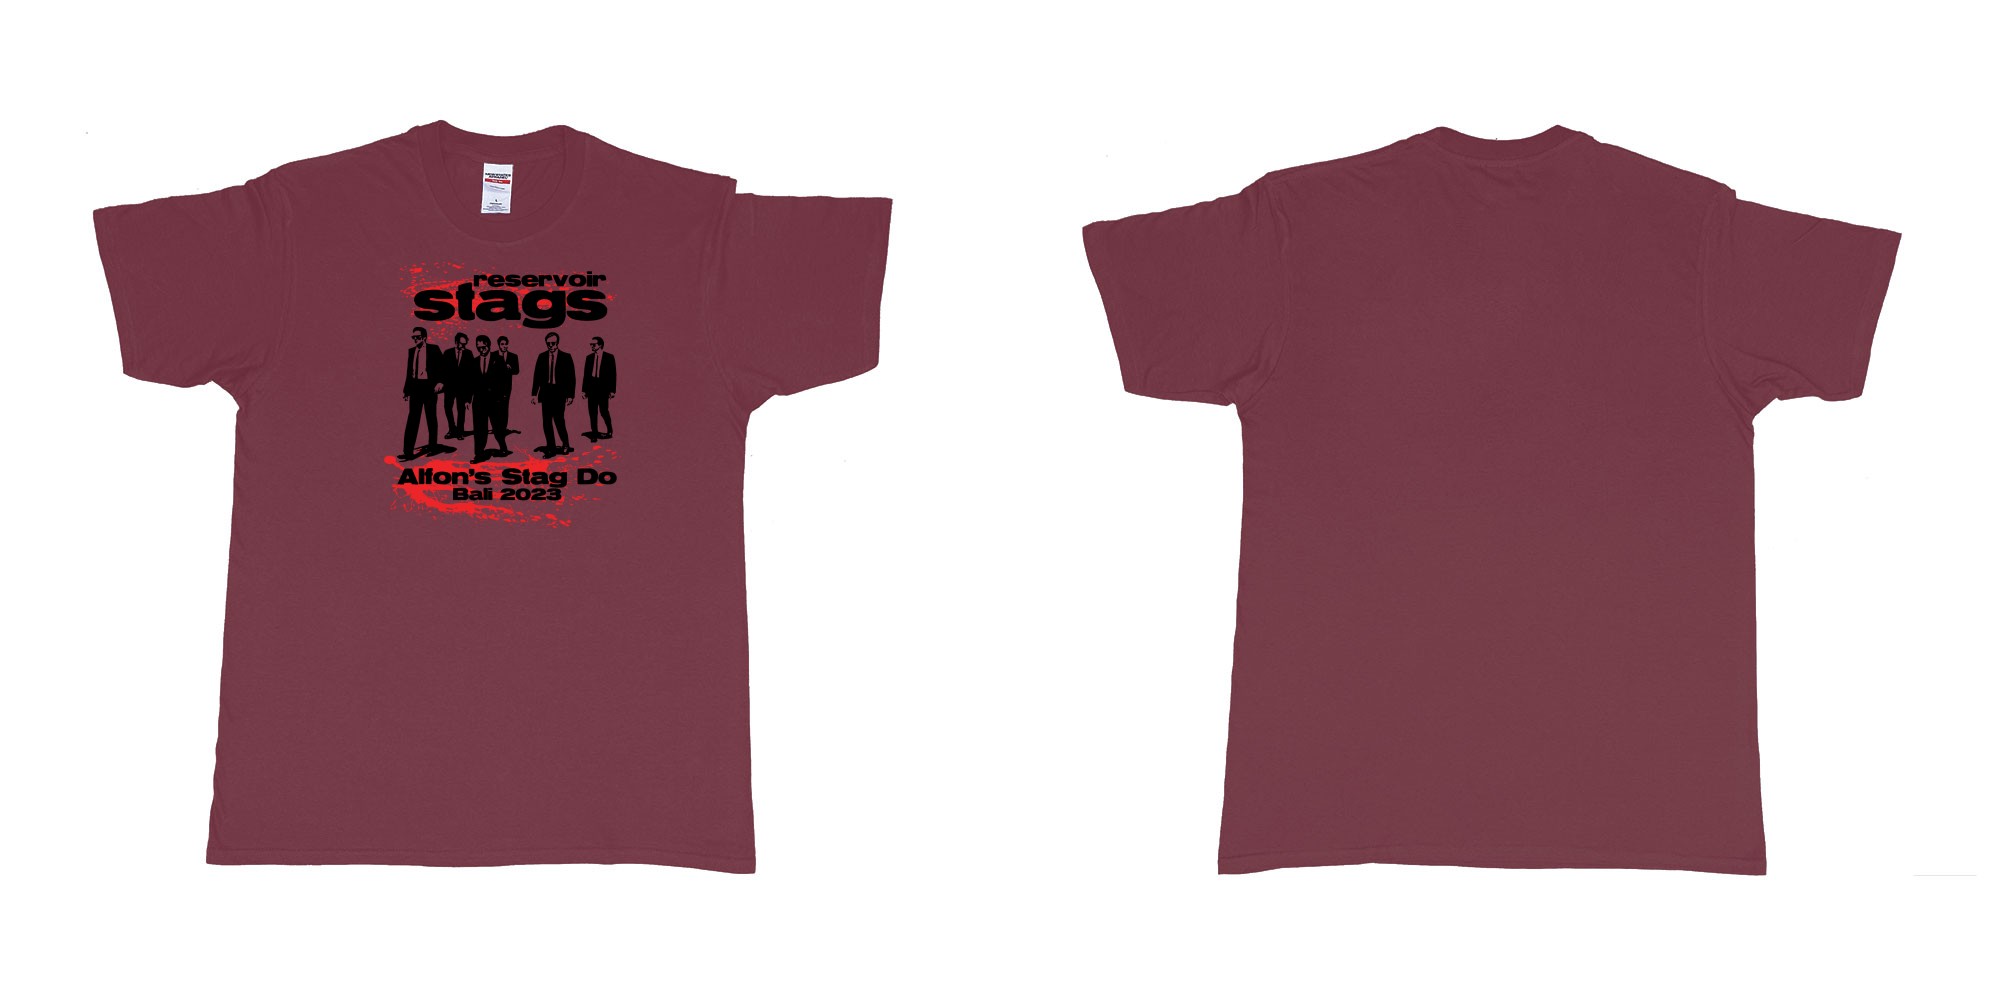 Custom tshirt design Reservoir Dogs Stag in fabric color marron choice your own text made in Bali by The Pirate Way